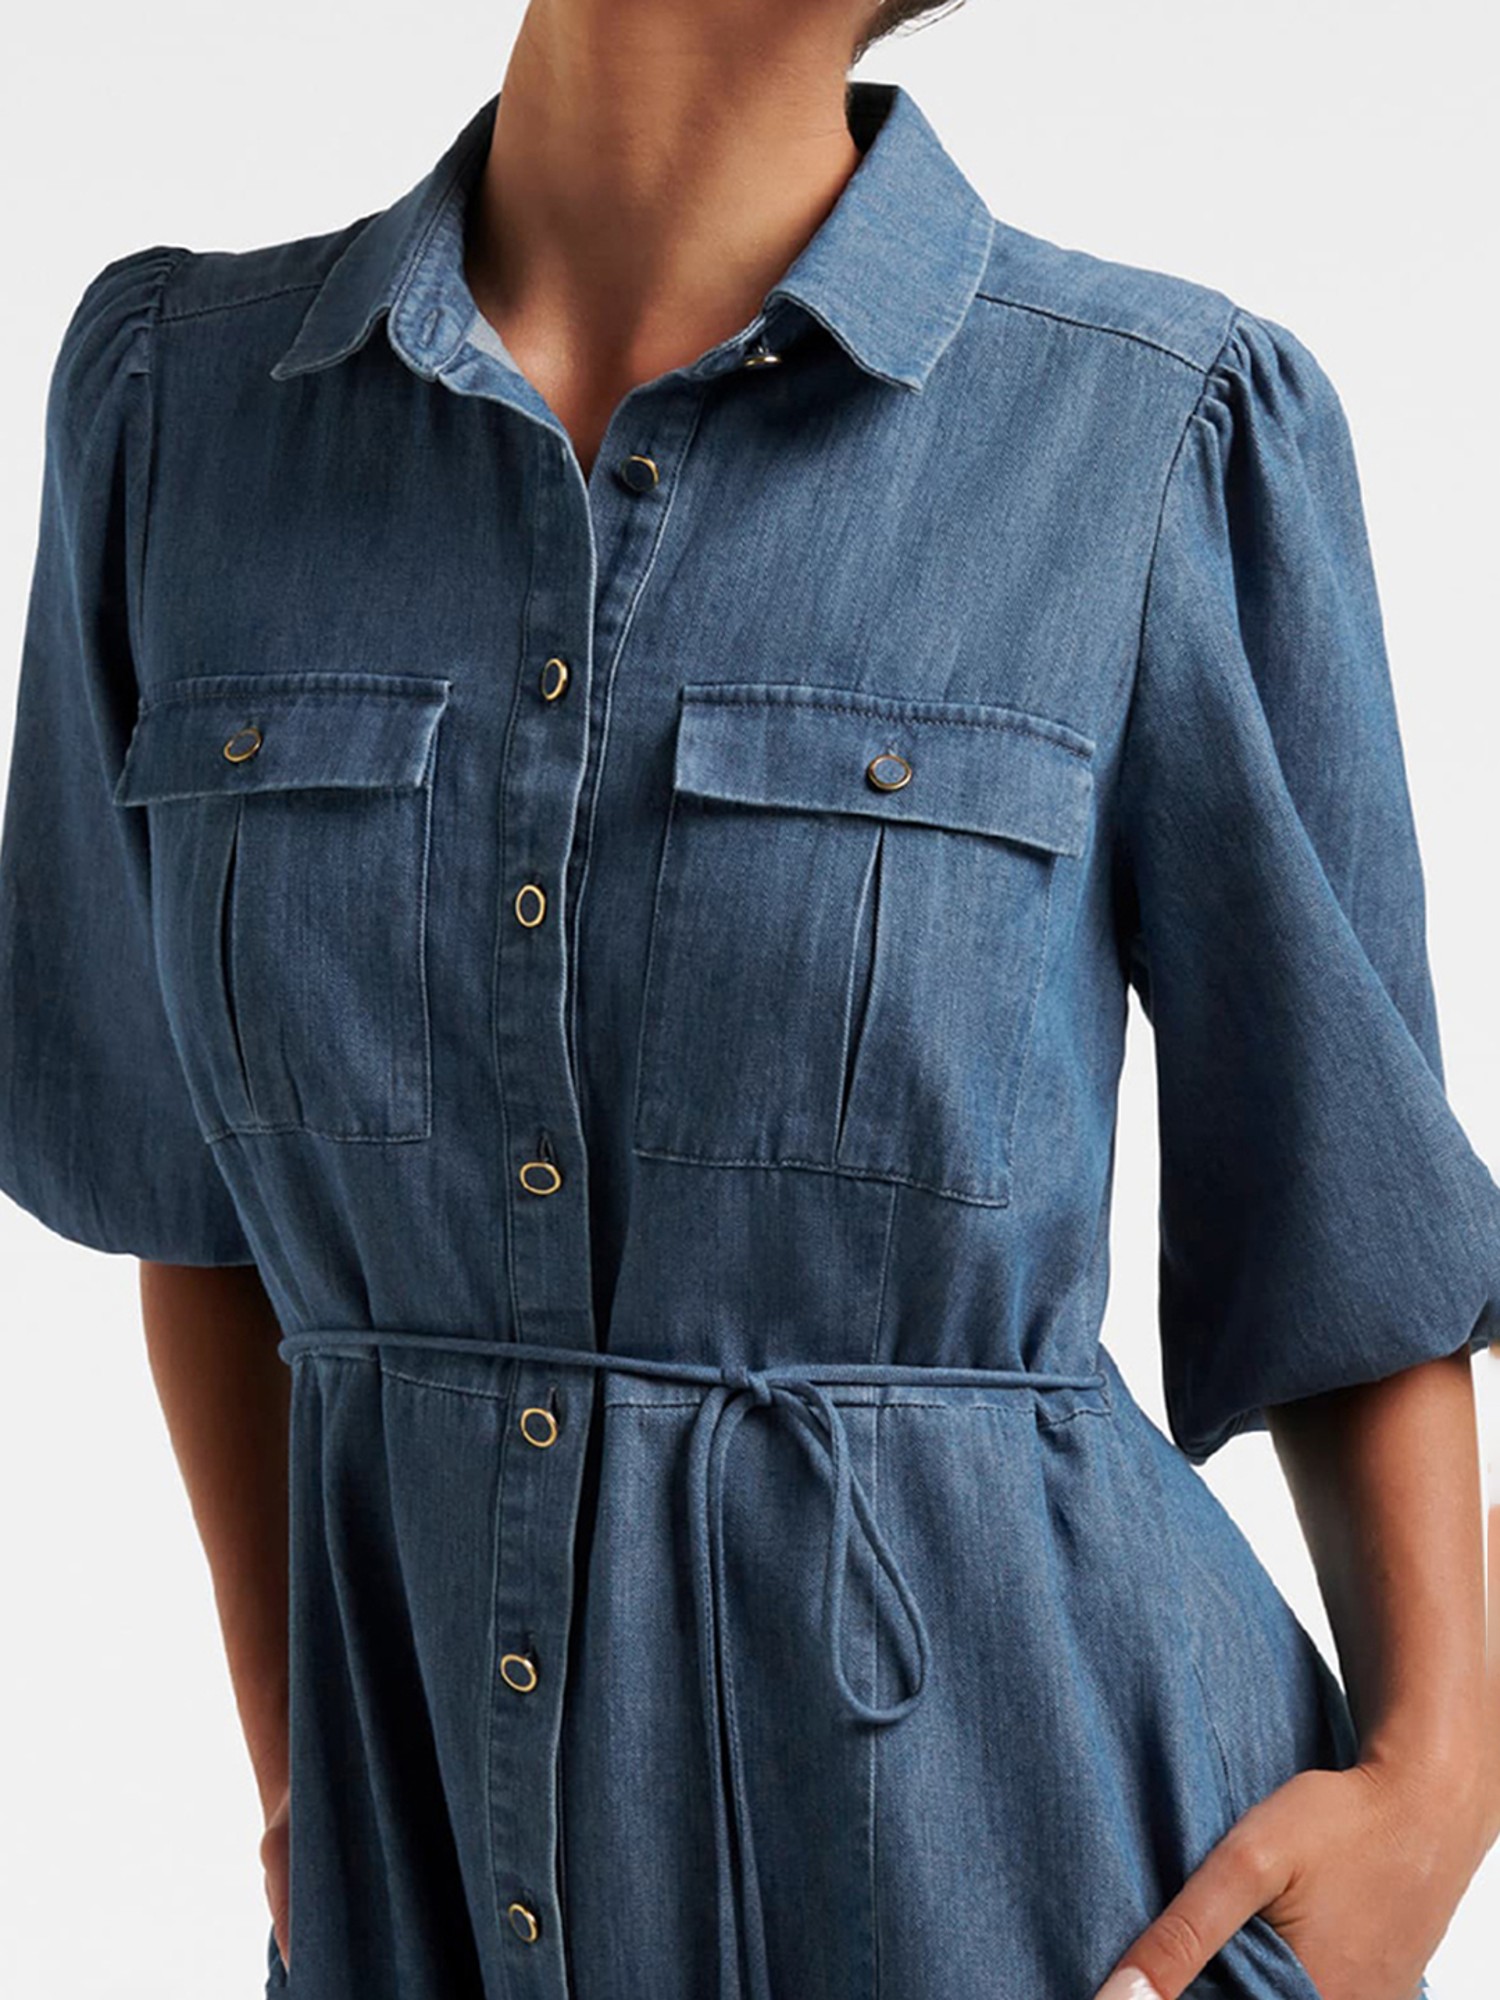 The best denim dresses to buy now and wear forever